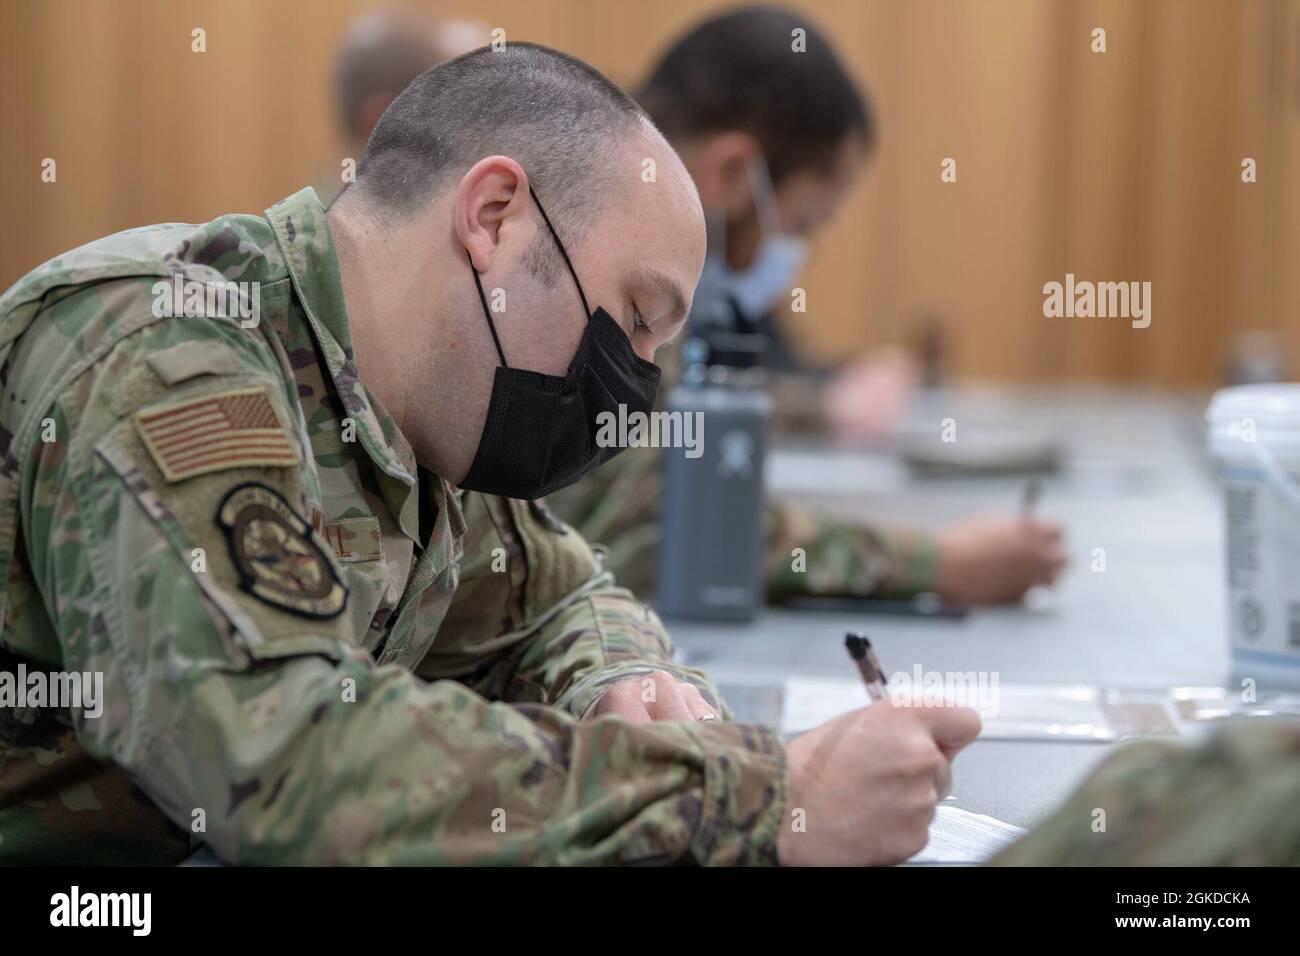 Airmen assigned to the 701st Munitions Maintenance Squadron complete paperwork before being administered the COVID-19 vaccine at Kleine Brogel Air Base, Belgium, March 19, 2021. These vaccines were administered by independent duty medical technicians who are responsible for providing all the medical care for members assigned to the 701st MUNSS. Stock Photo